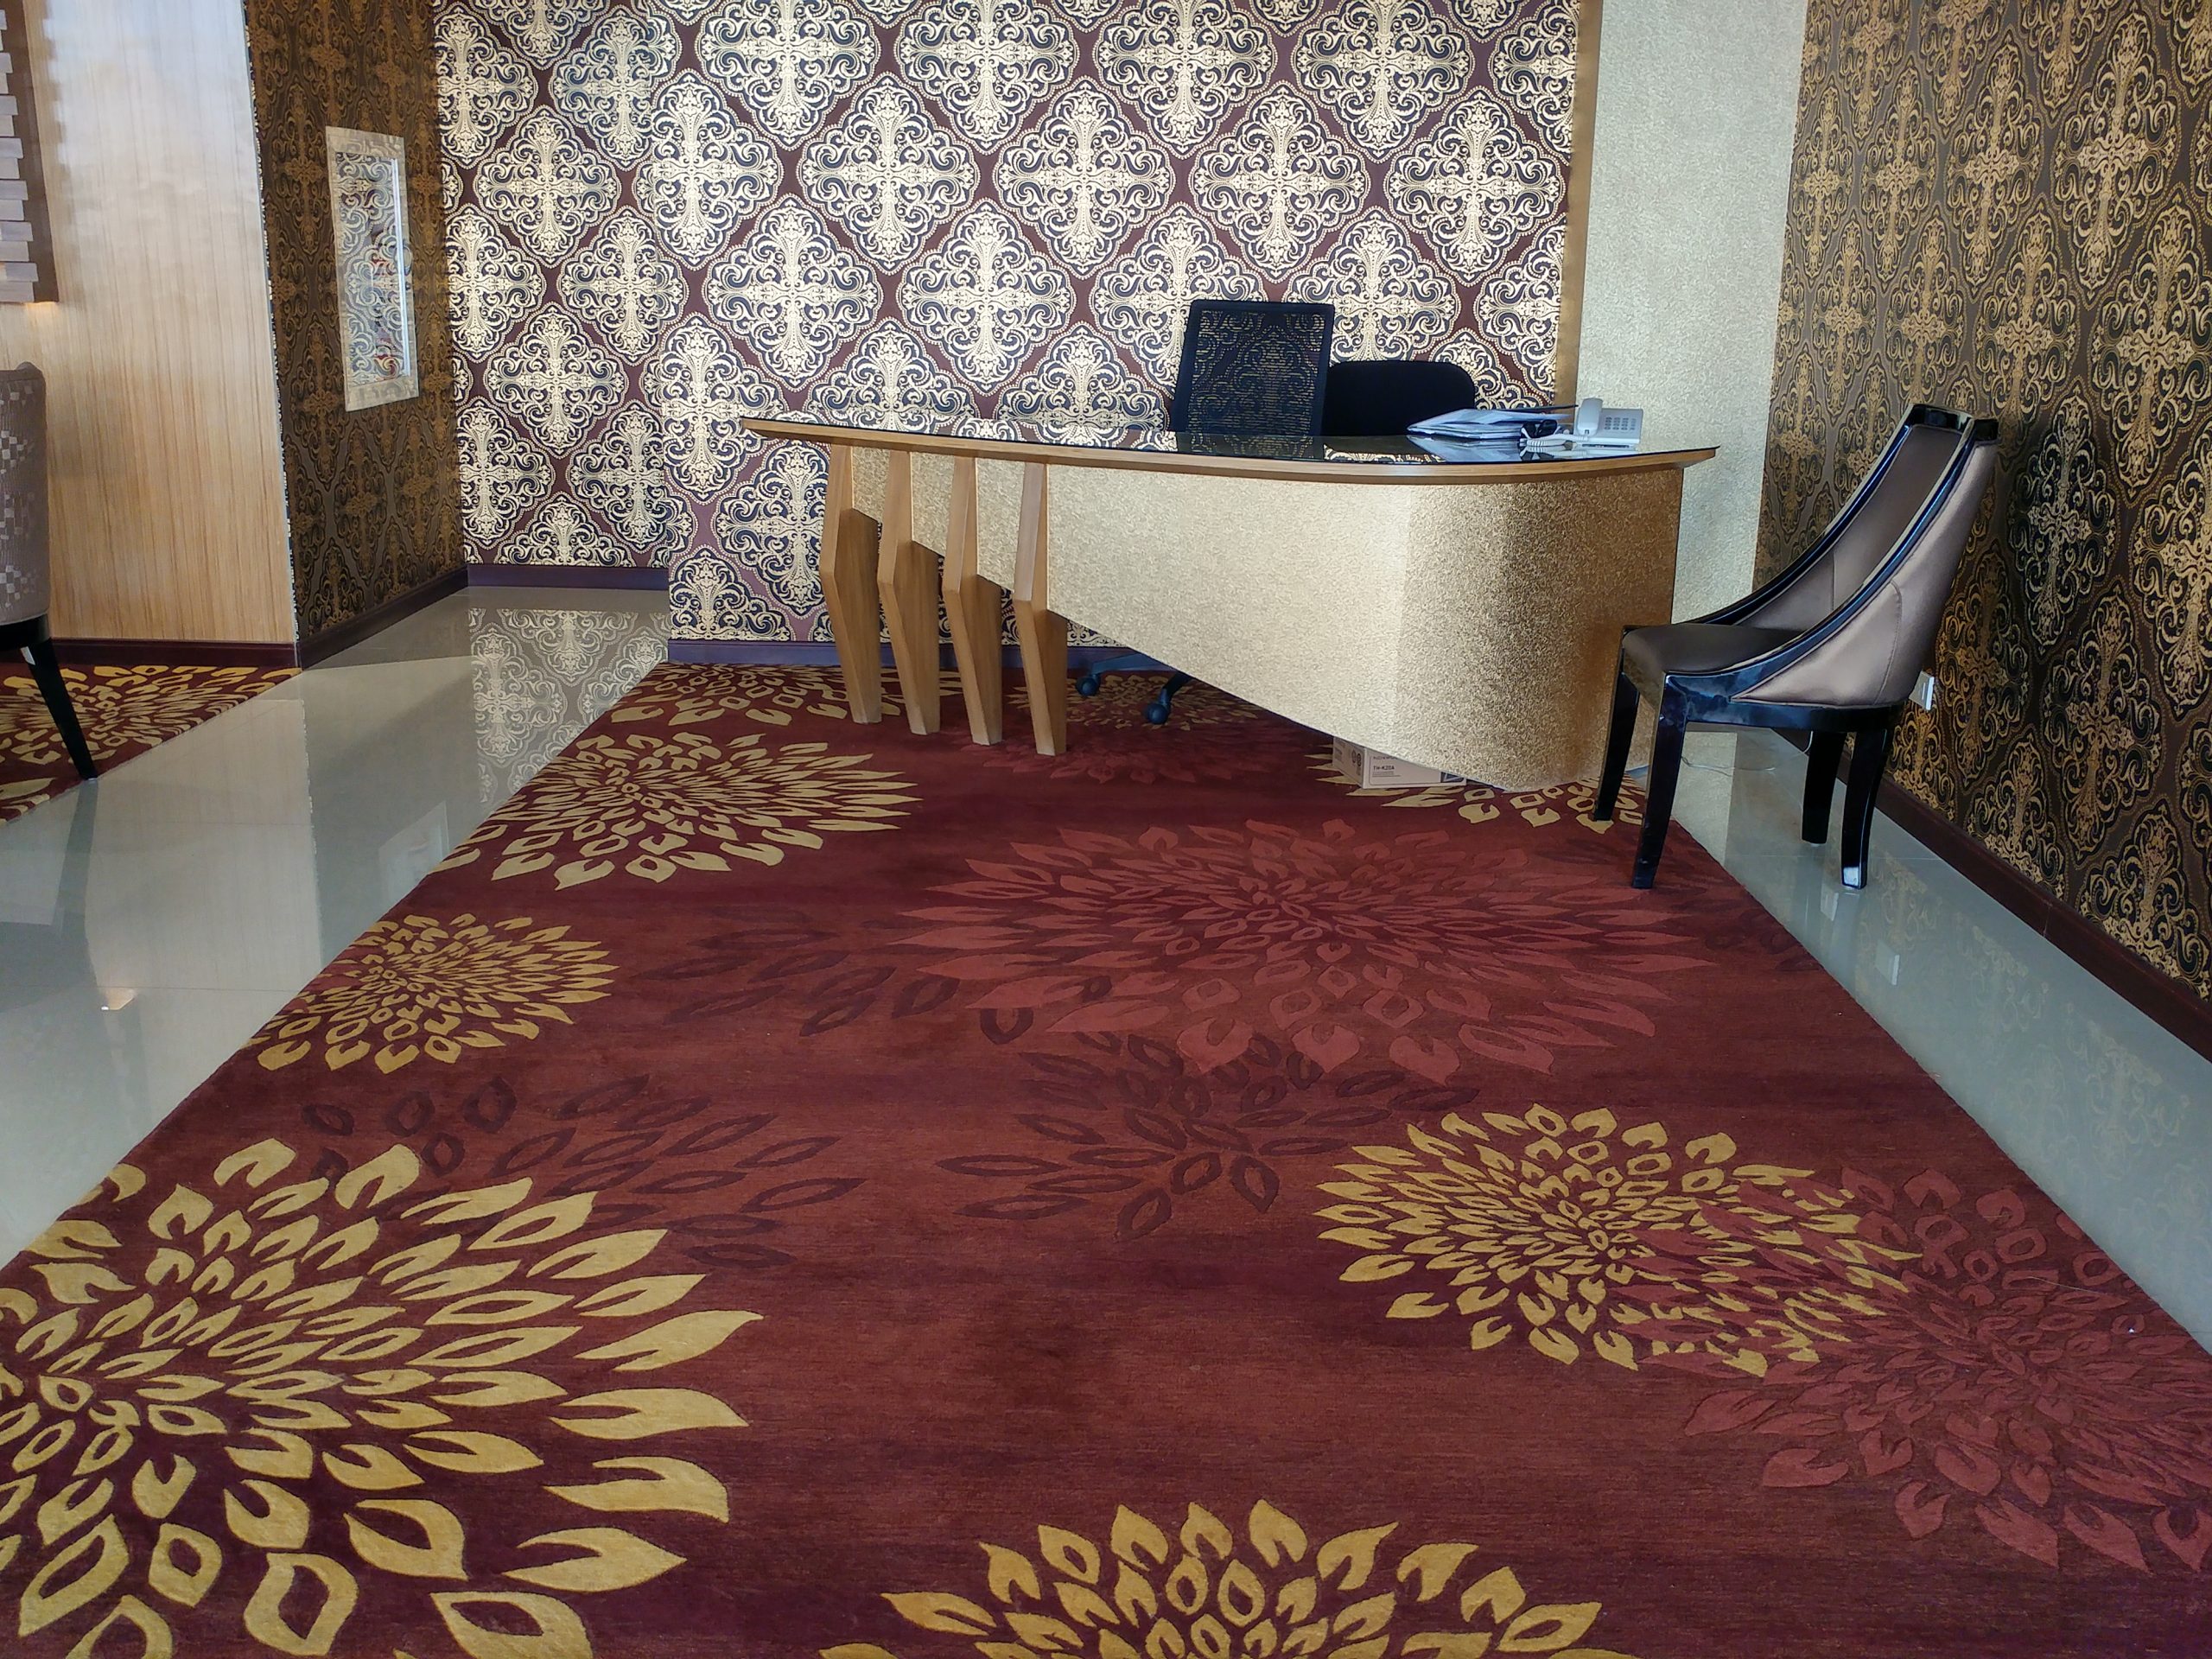 Grand Xing Iloilo Axminster Carpet Roll Philippines (1)